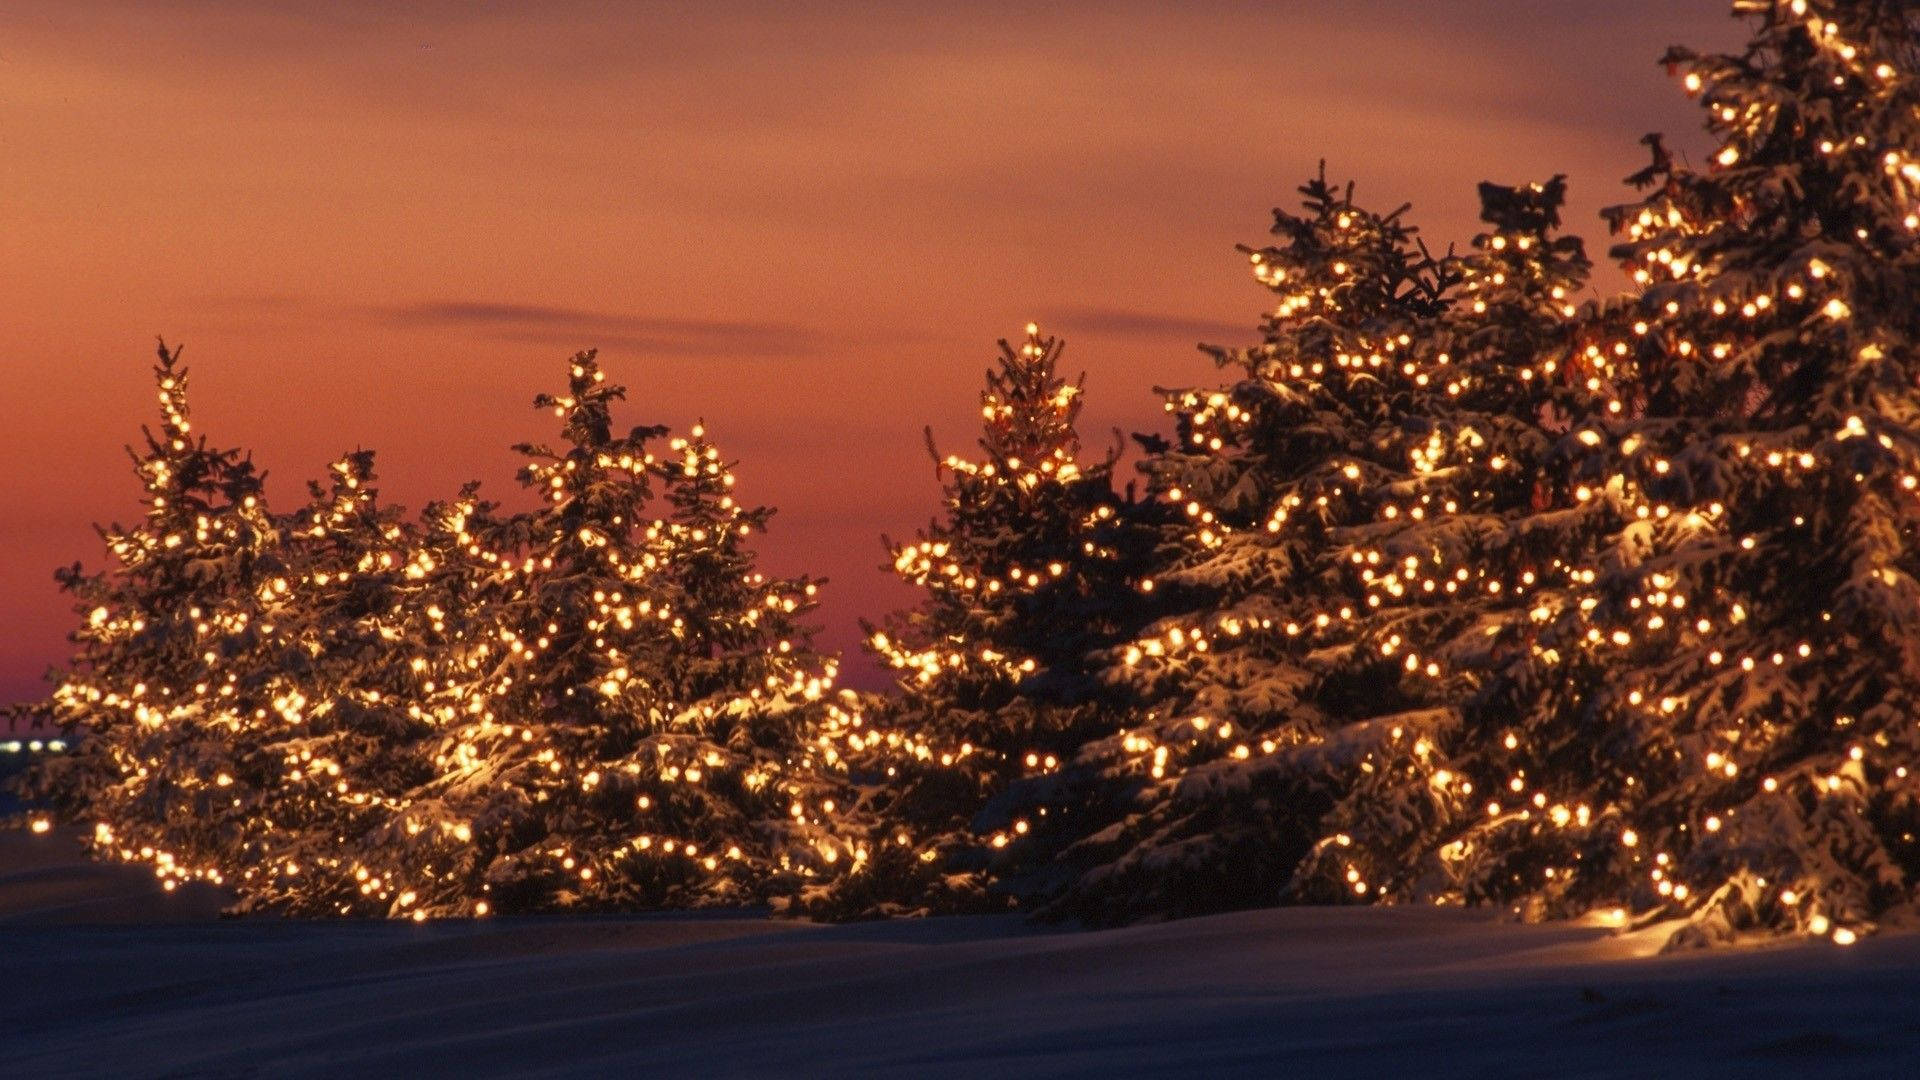 Christmas Trees Lit Up At Sunset Wallpaper